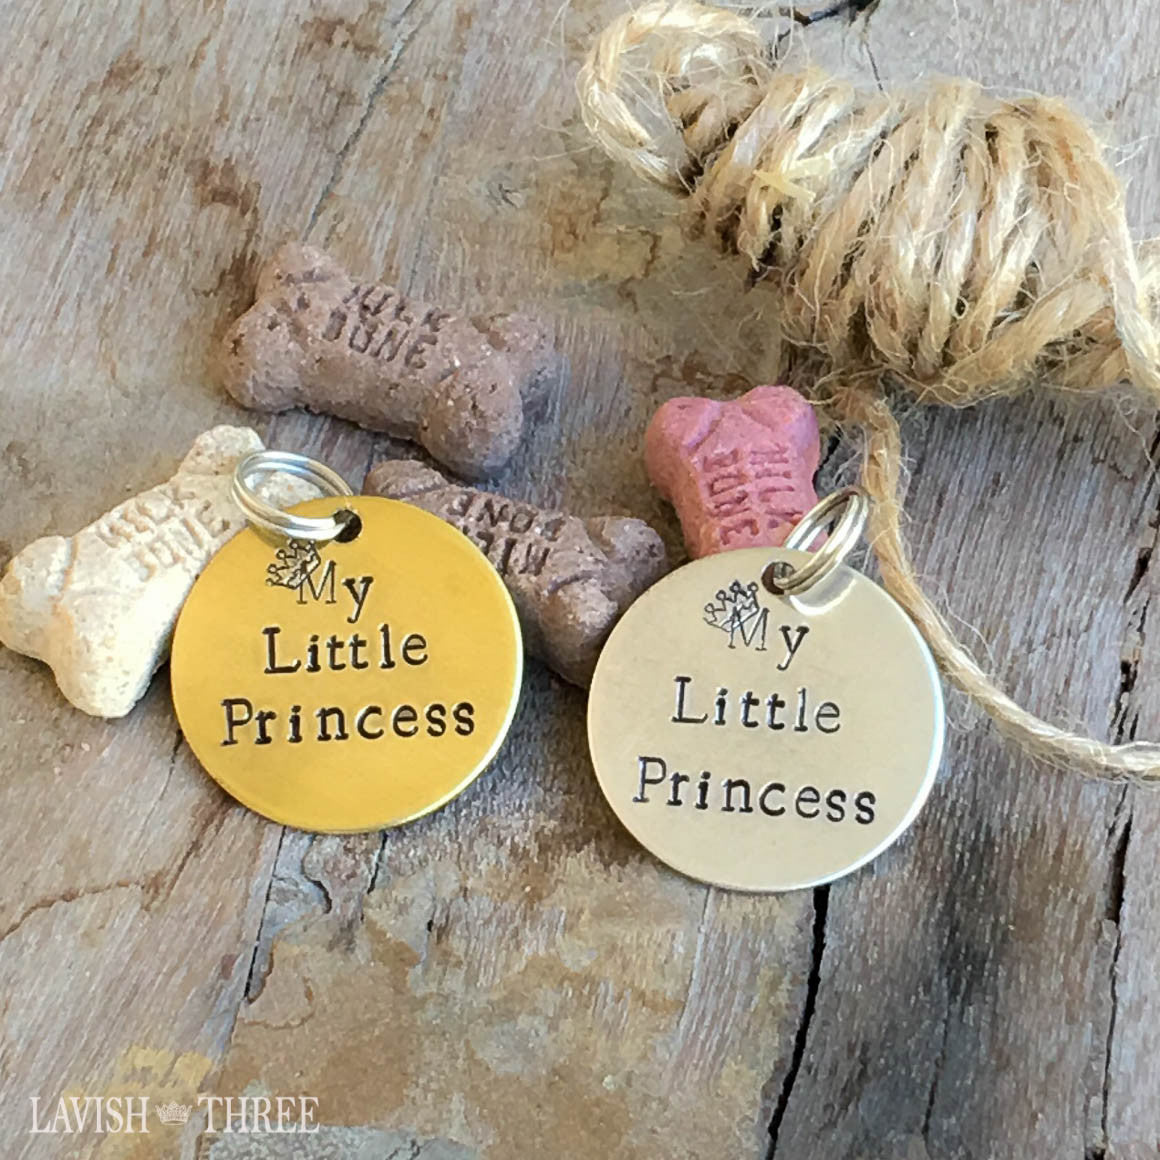 My little princess hand stamped dog or cat pet tag charm, brass or nickel